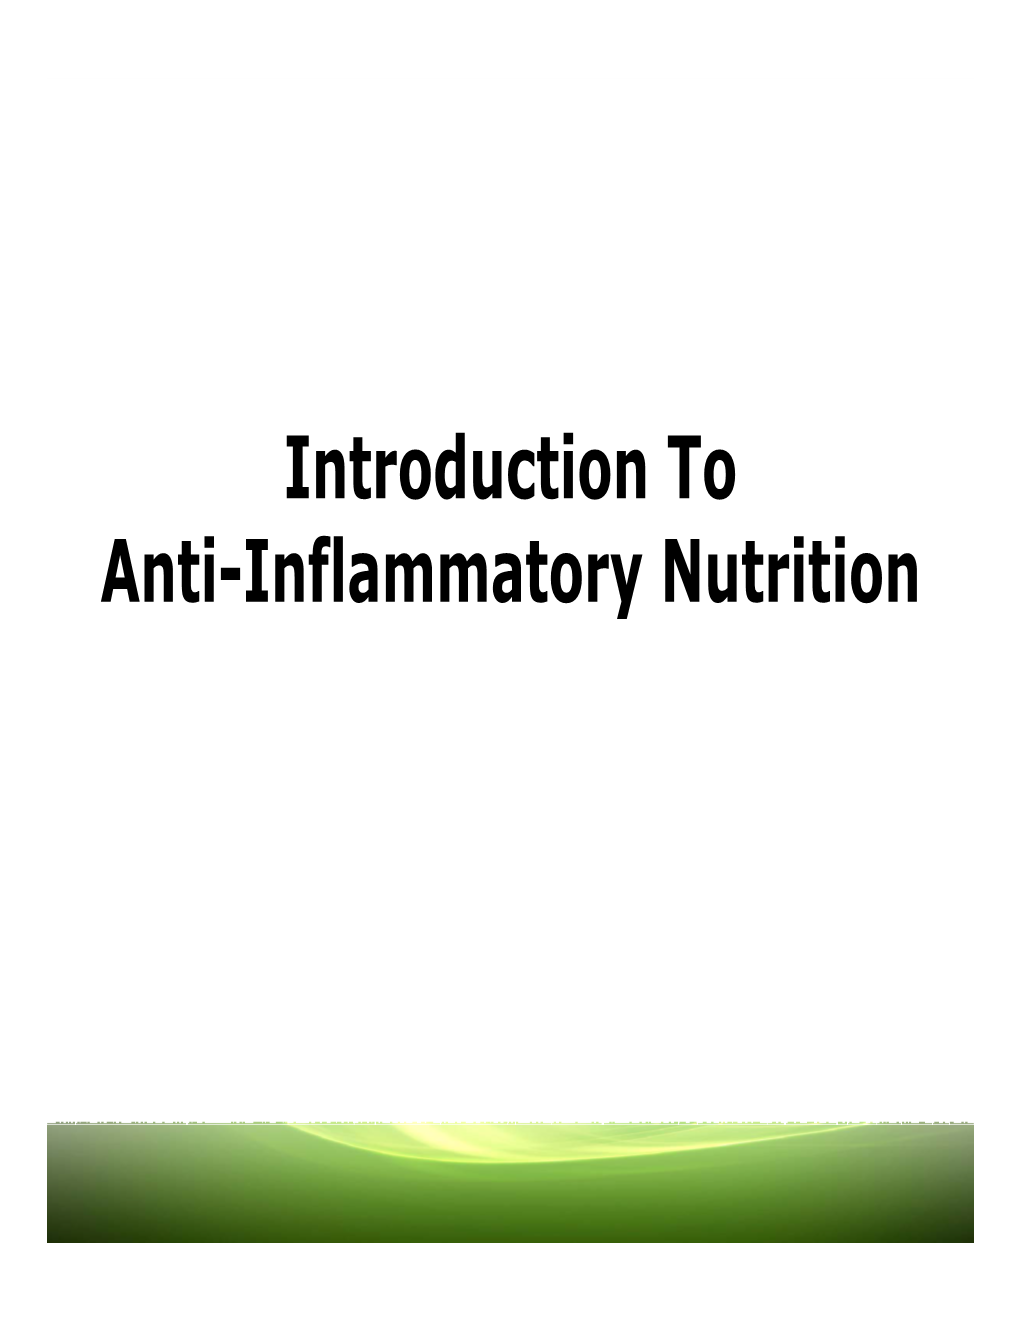 Introduction to the Zone Diet and Anti-Inflammatory Nutrition